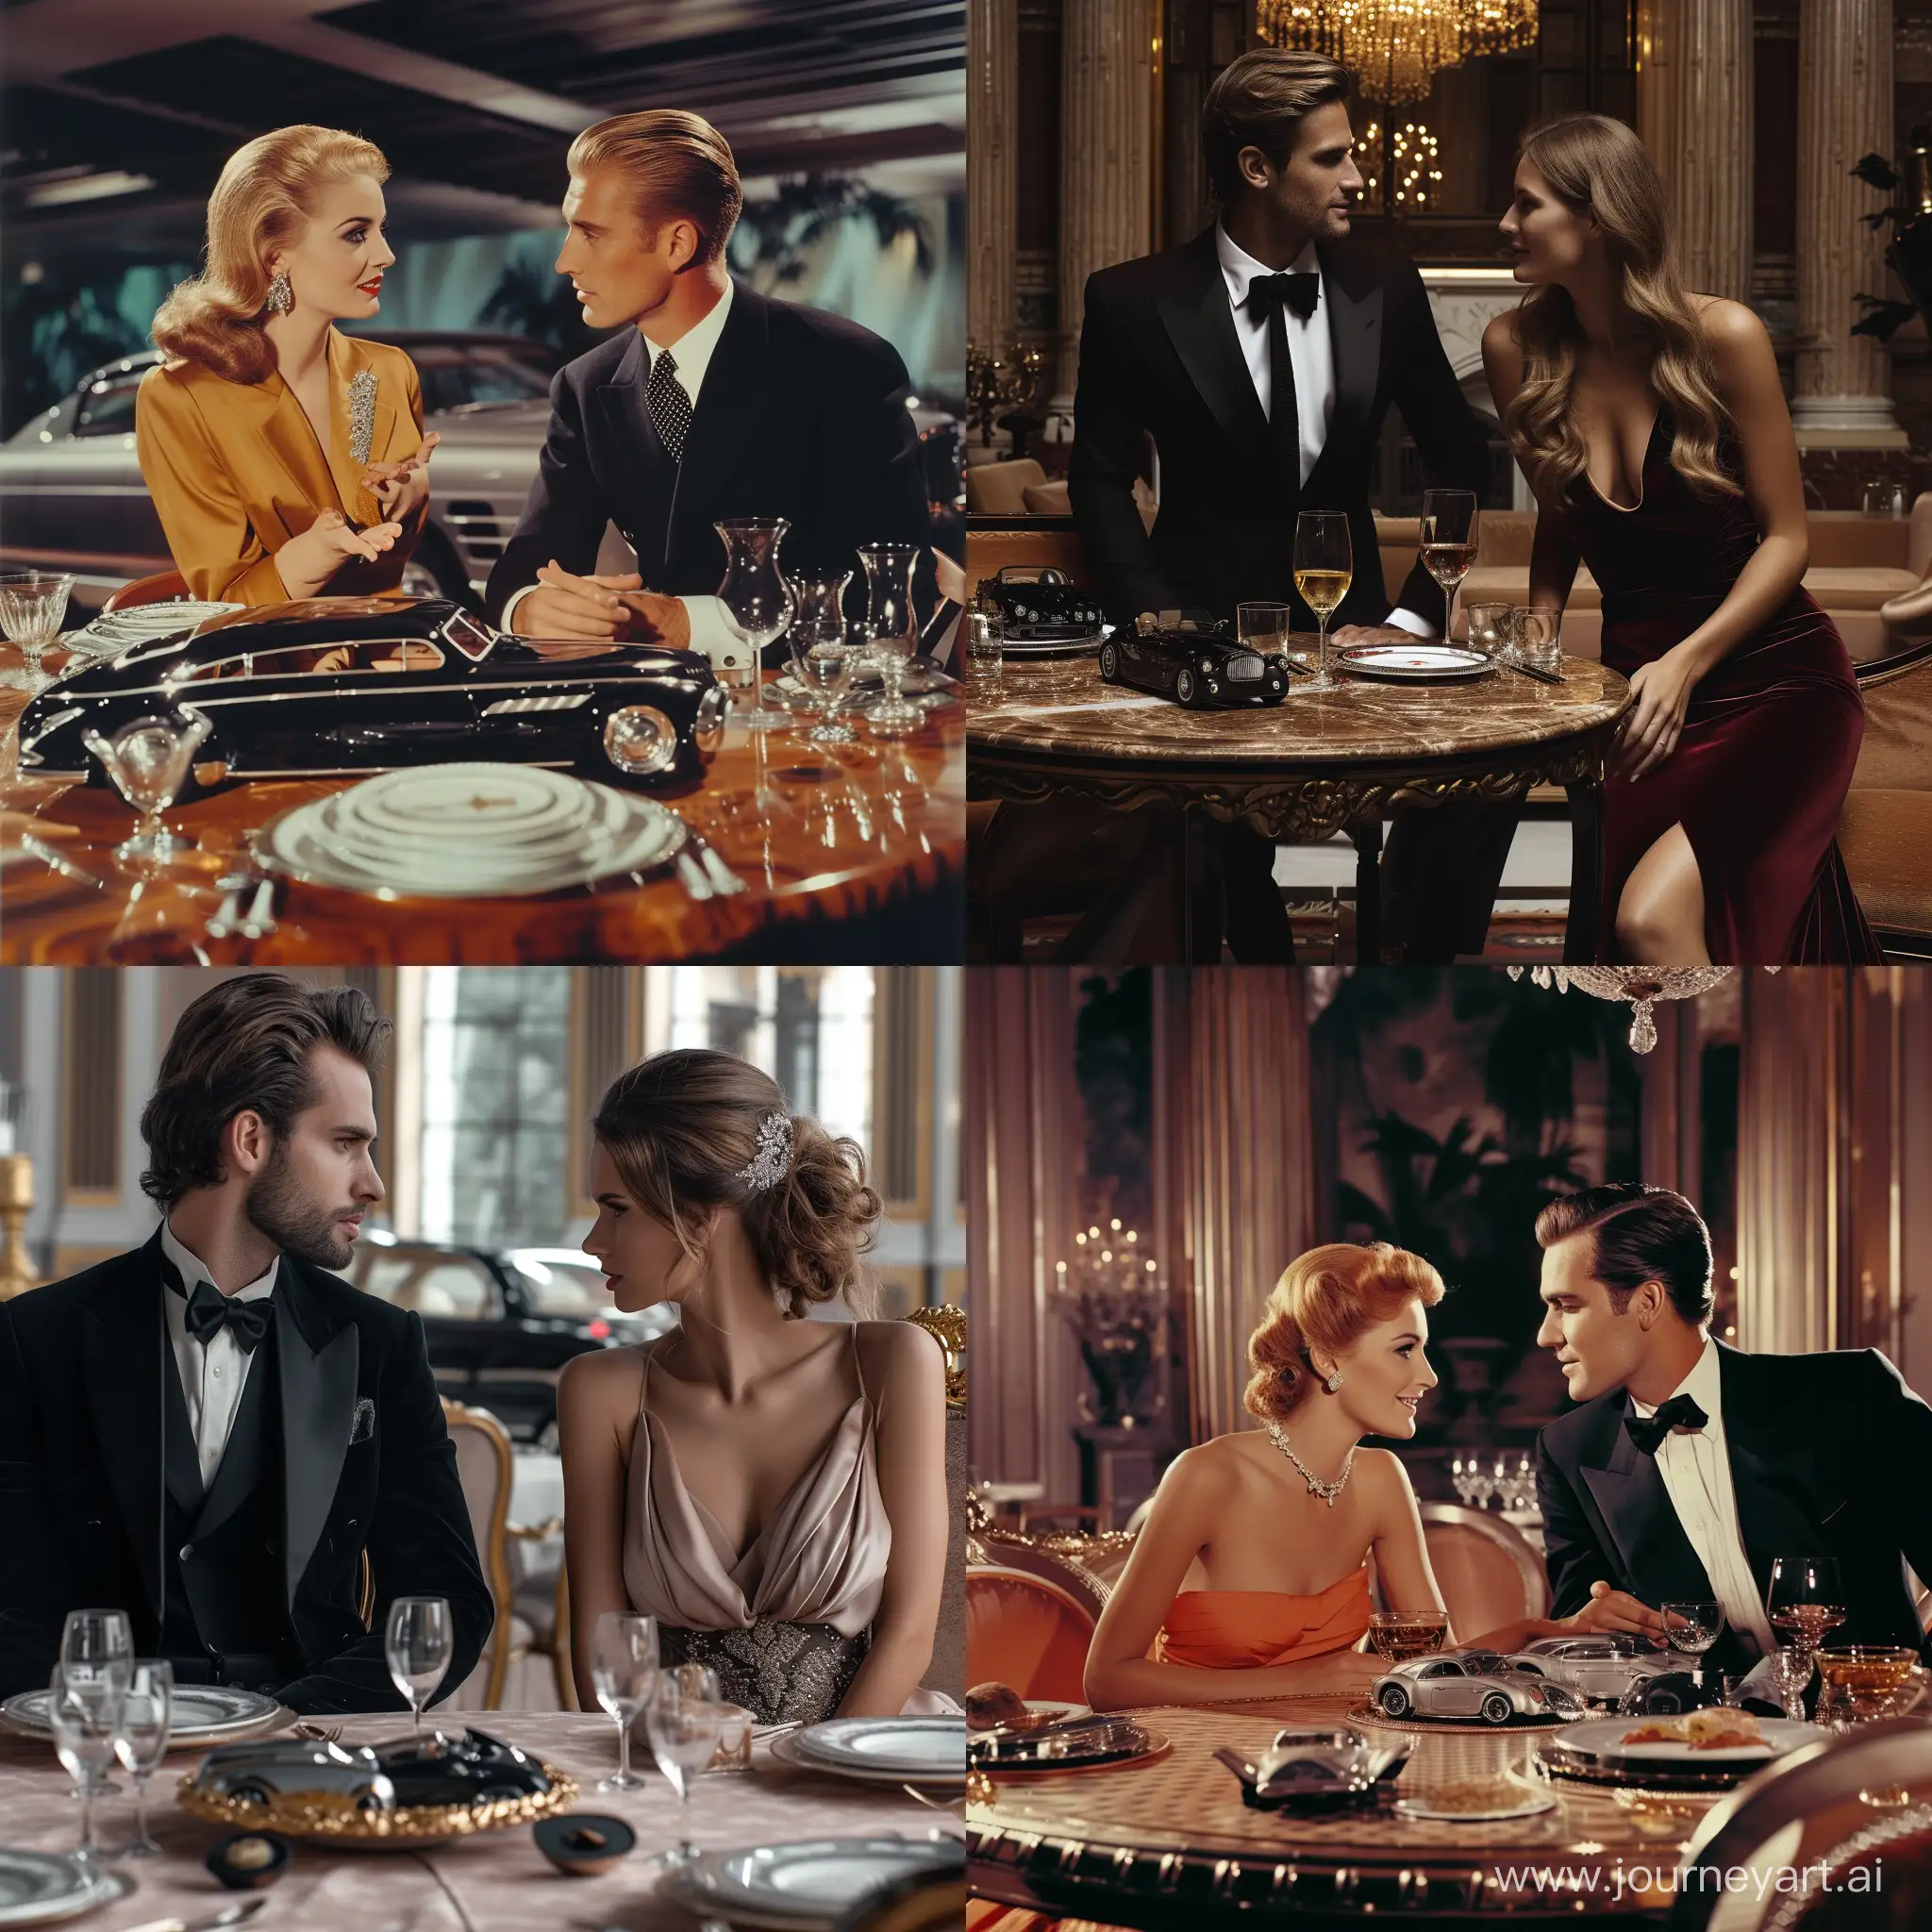 Affluent-Couple-Discussing-V6-Cars-at-Opulent-Table